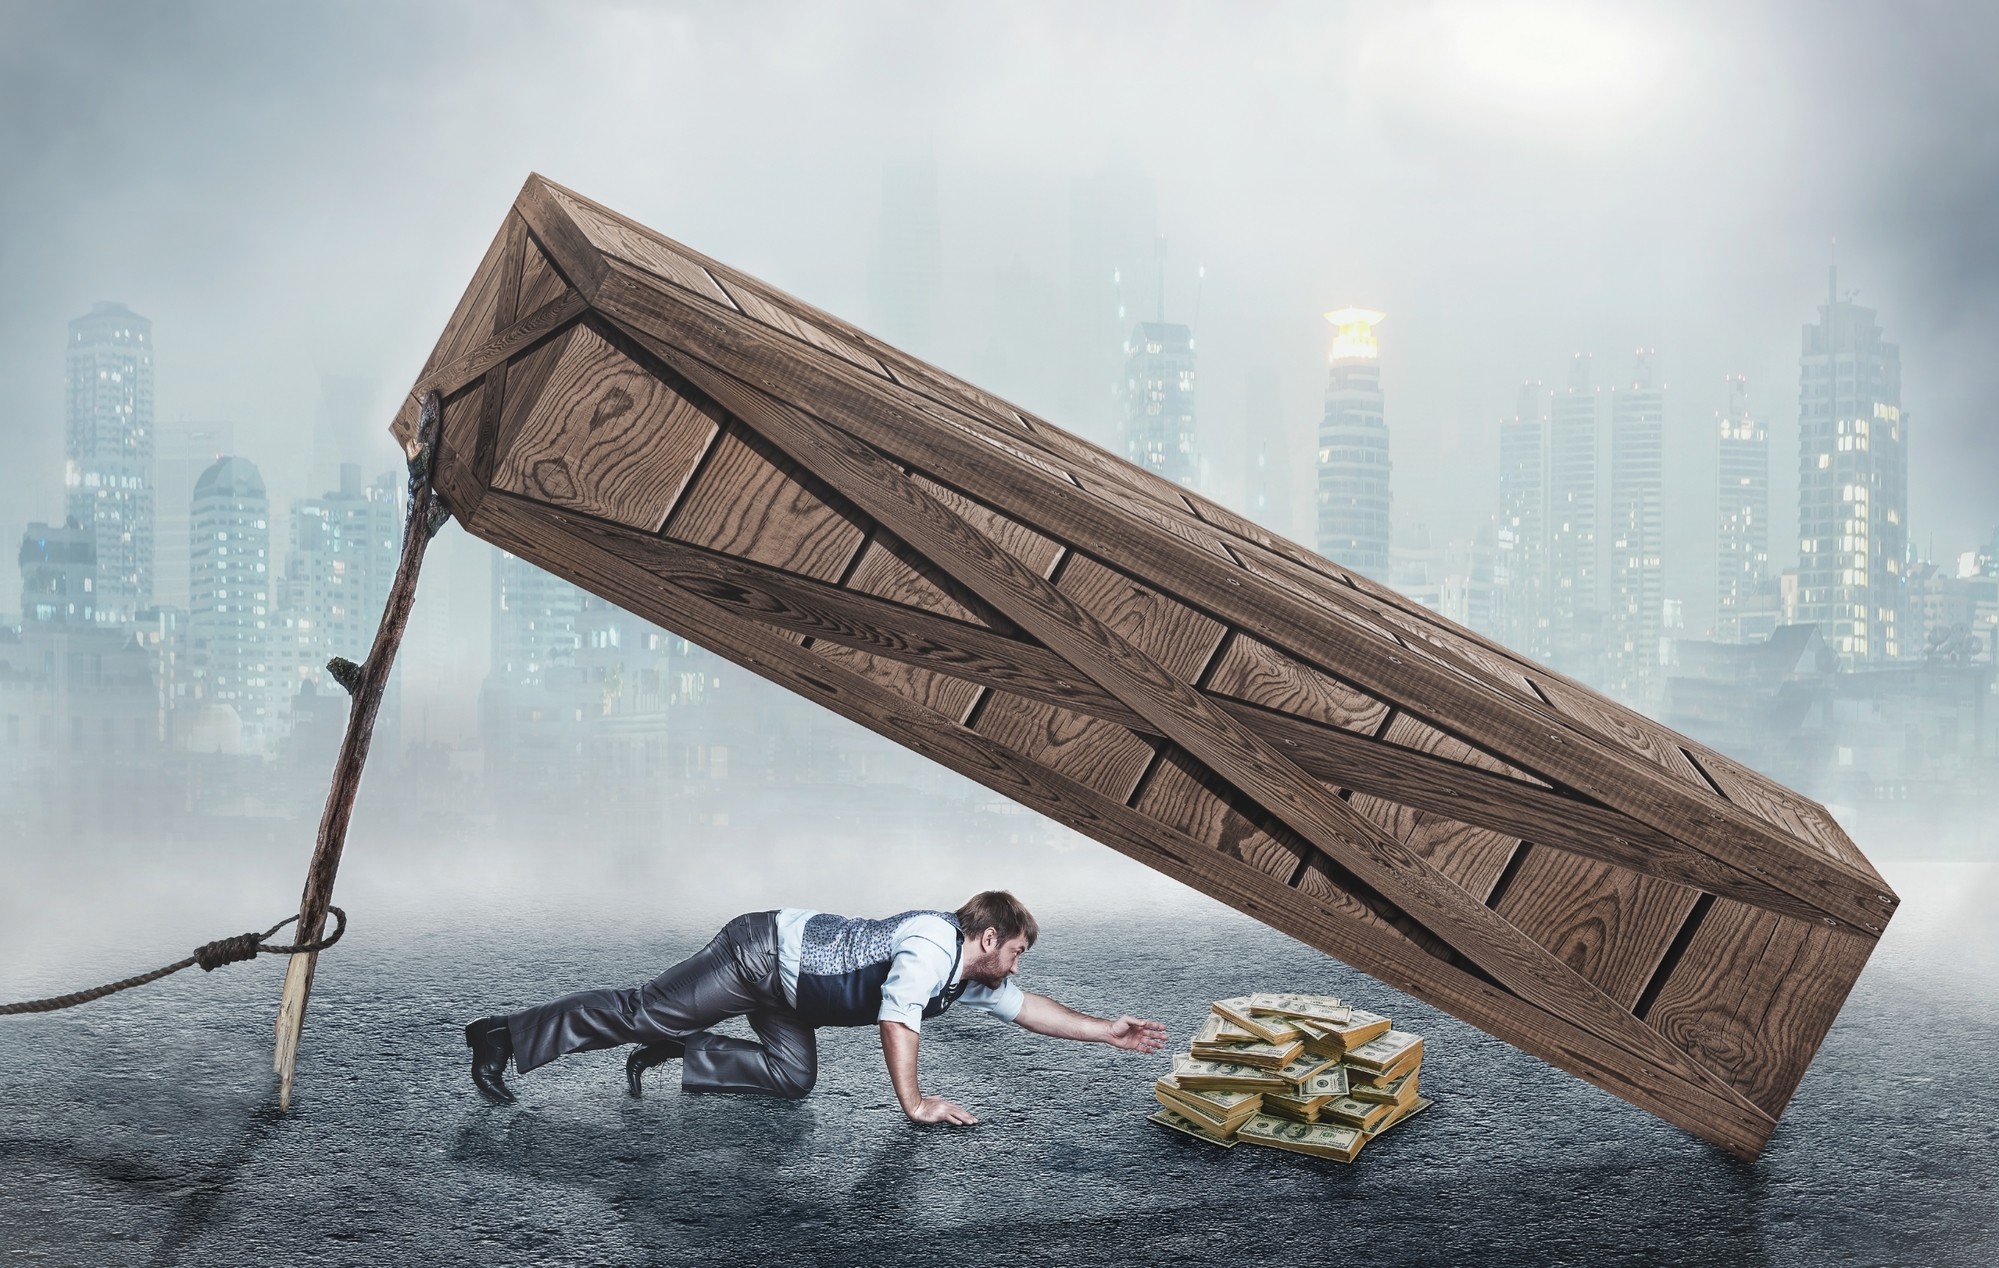 The 5 Biggest Contract Management Traps & How to Avoid Them